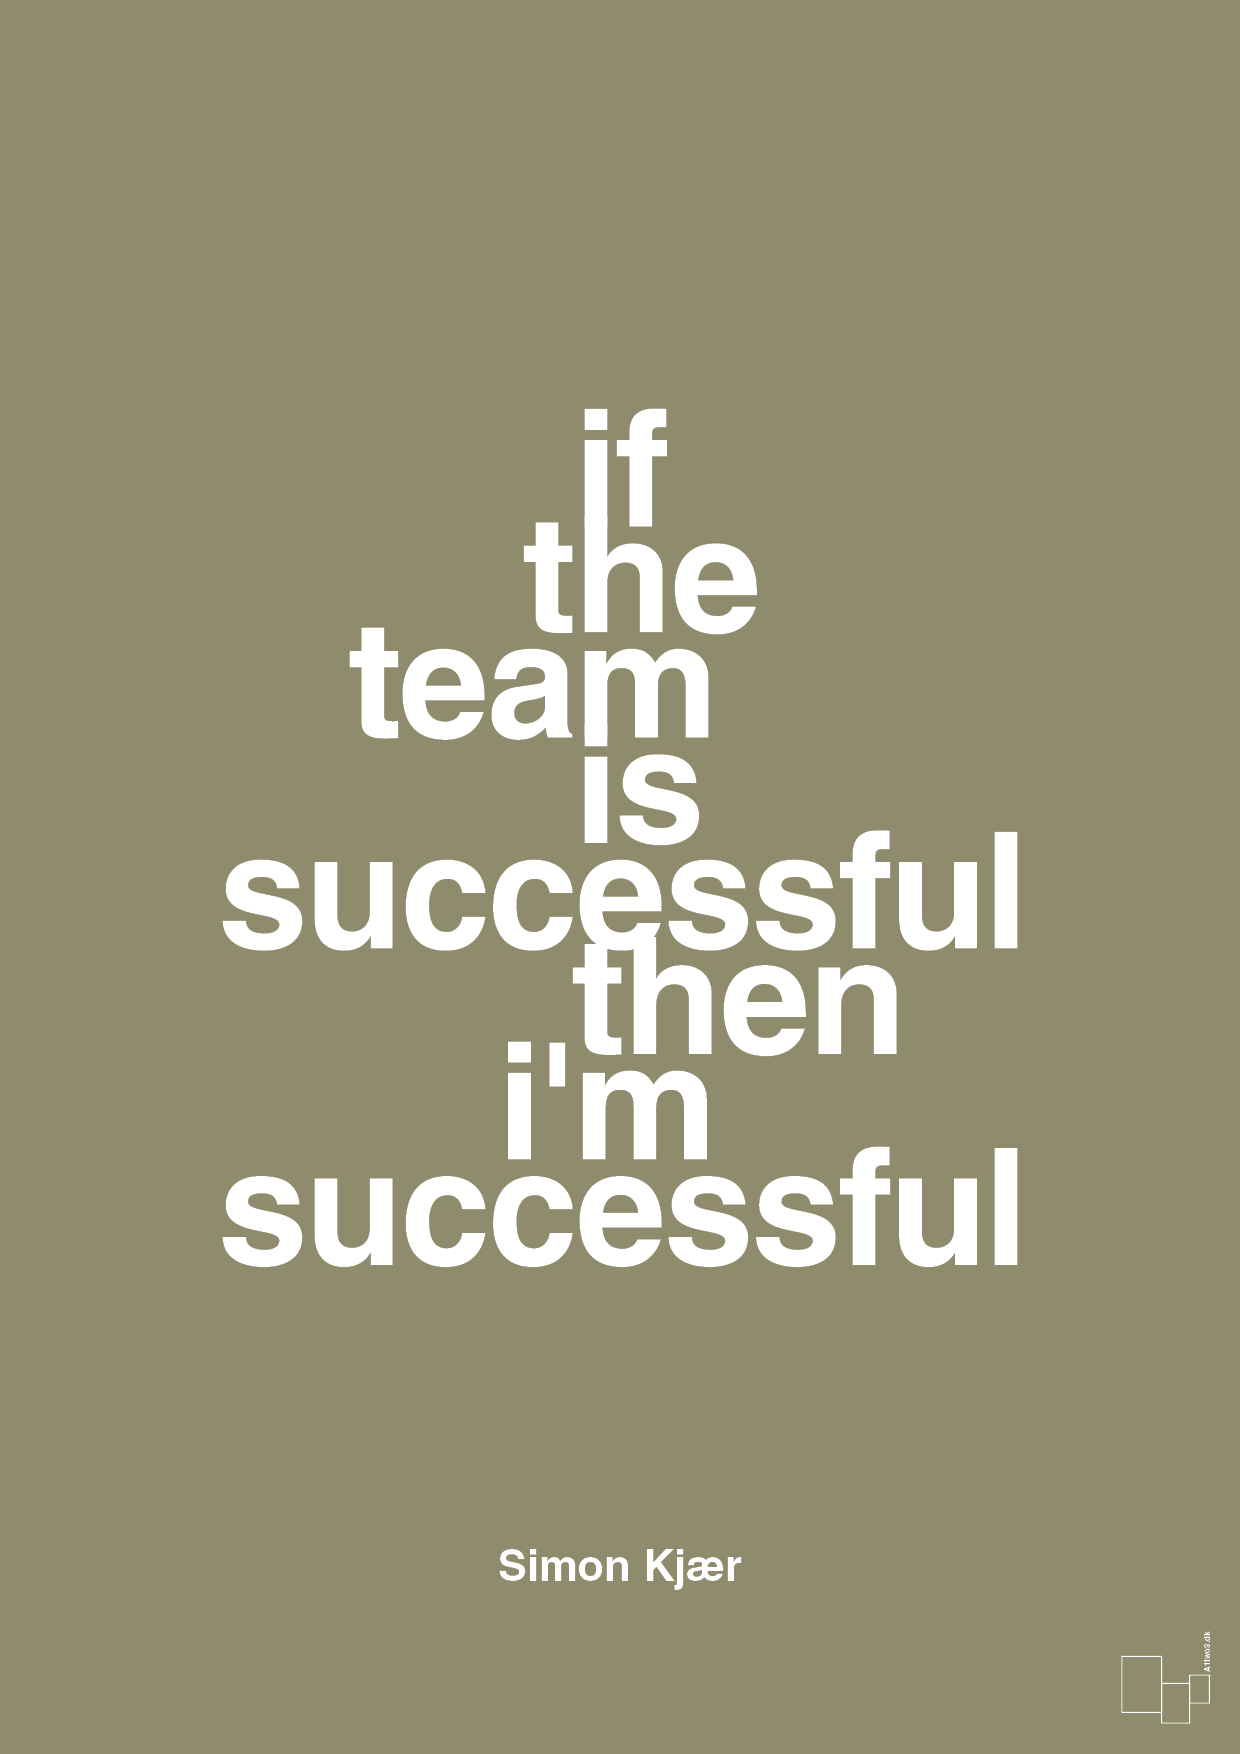 if the team is successful then i'm successful - Plakat med Citater i Misty Forrest